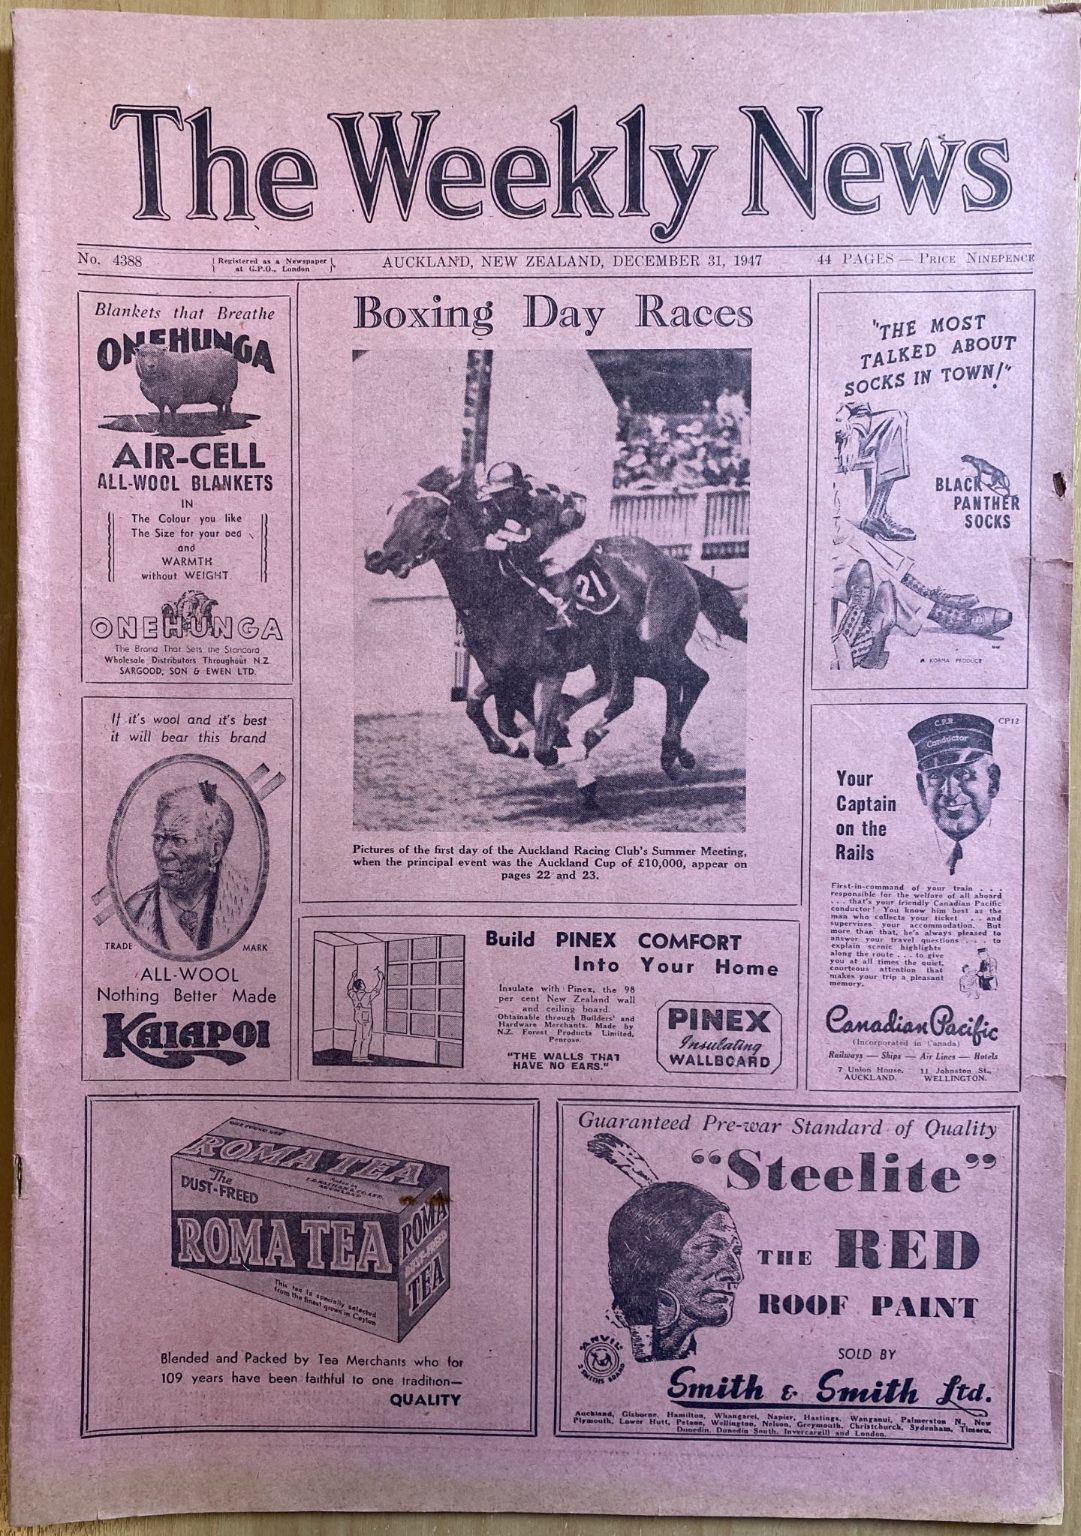 OLD NEWSPAPER: The Weekly News, No. 4388, 31 December 1947